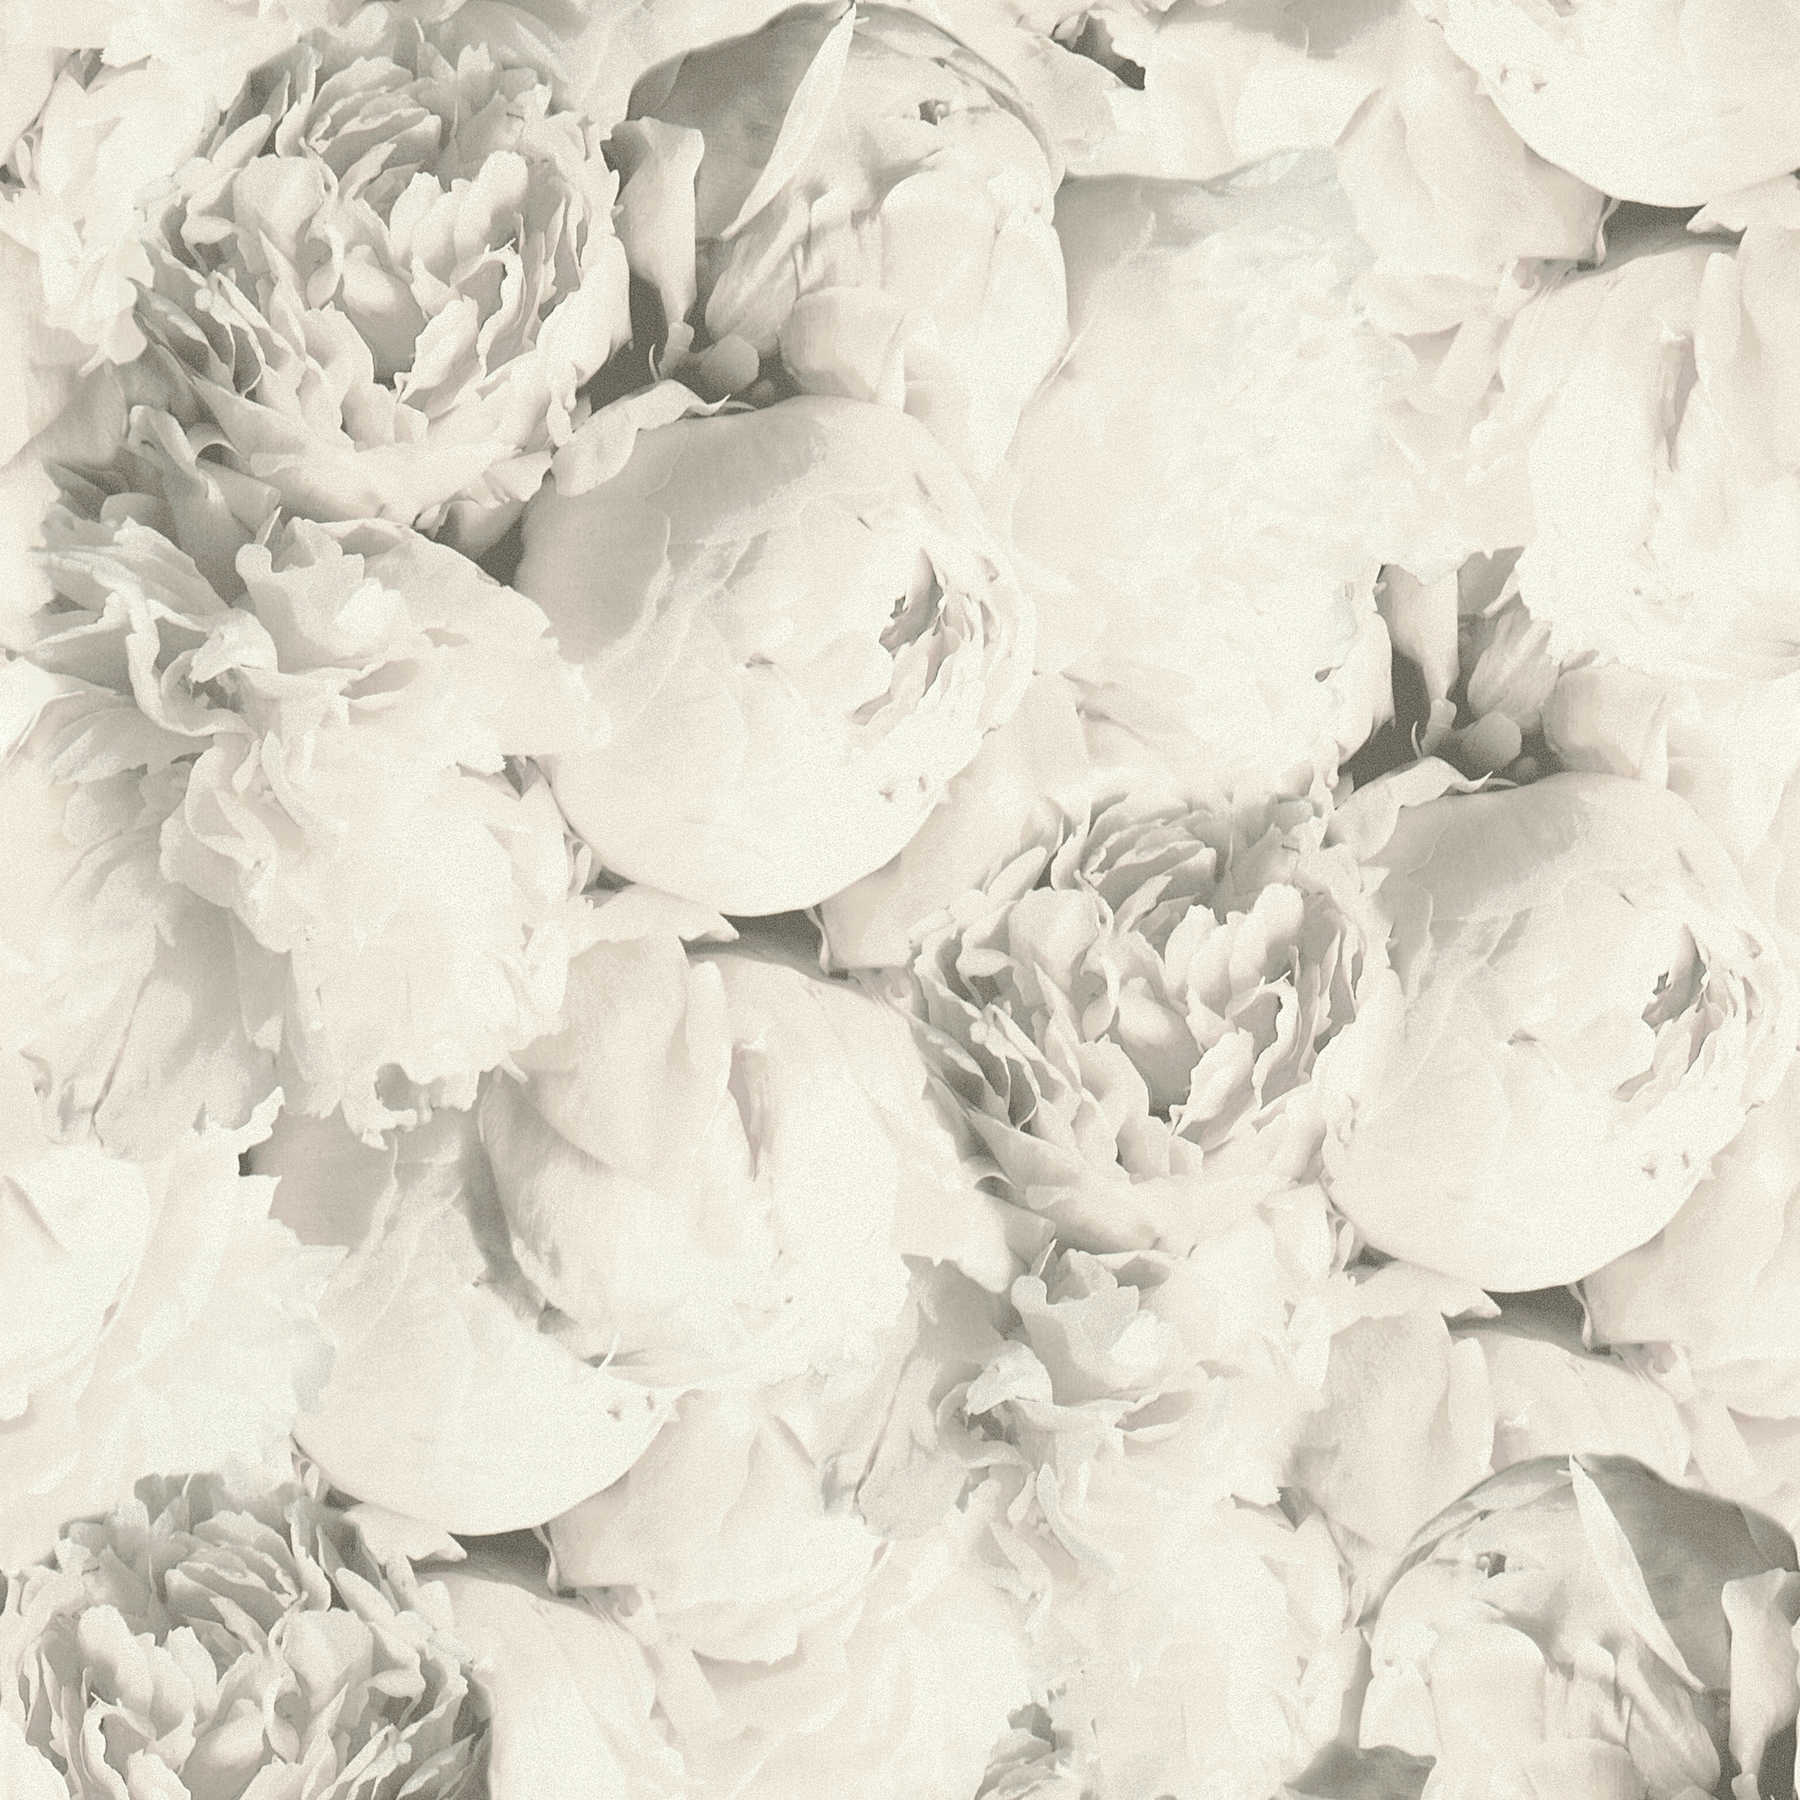 Floral wallpaper roses with shimmer effect - beige, cream, grey
